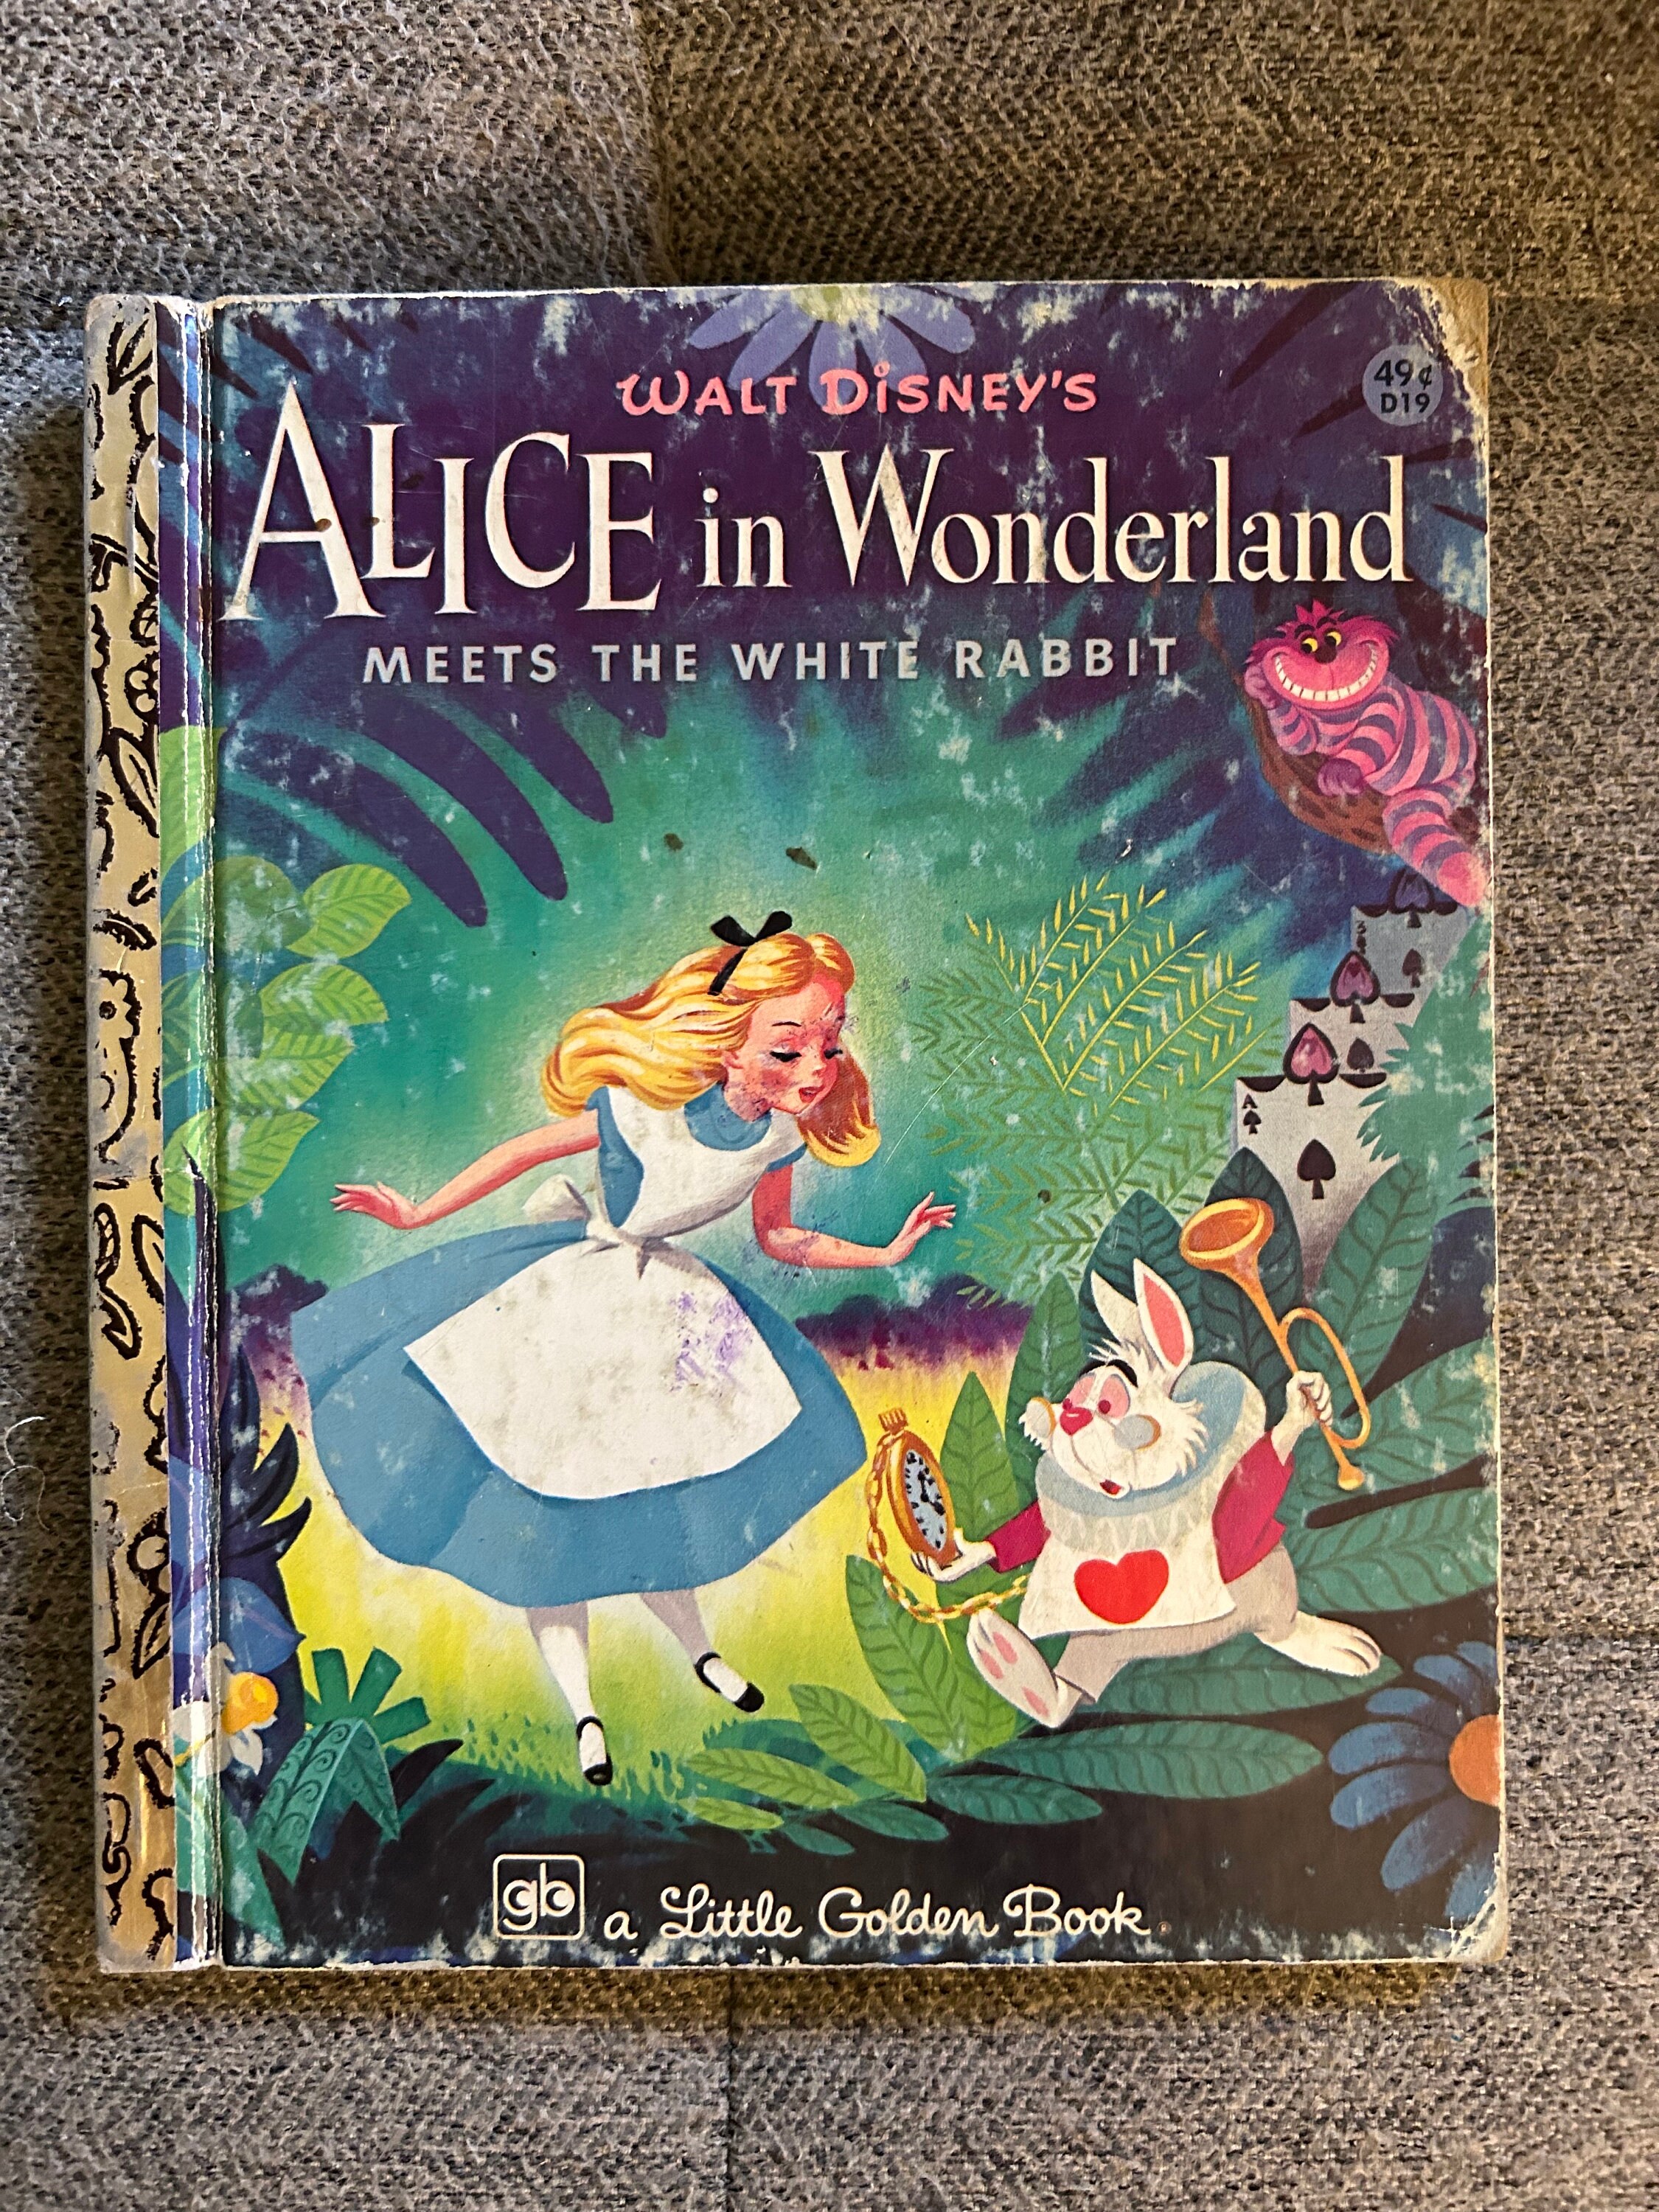 Alice Wonderland Through Looking Glass Collectibles Lot Belt Buckle Books  Litho